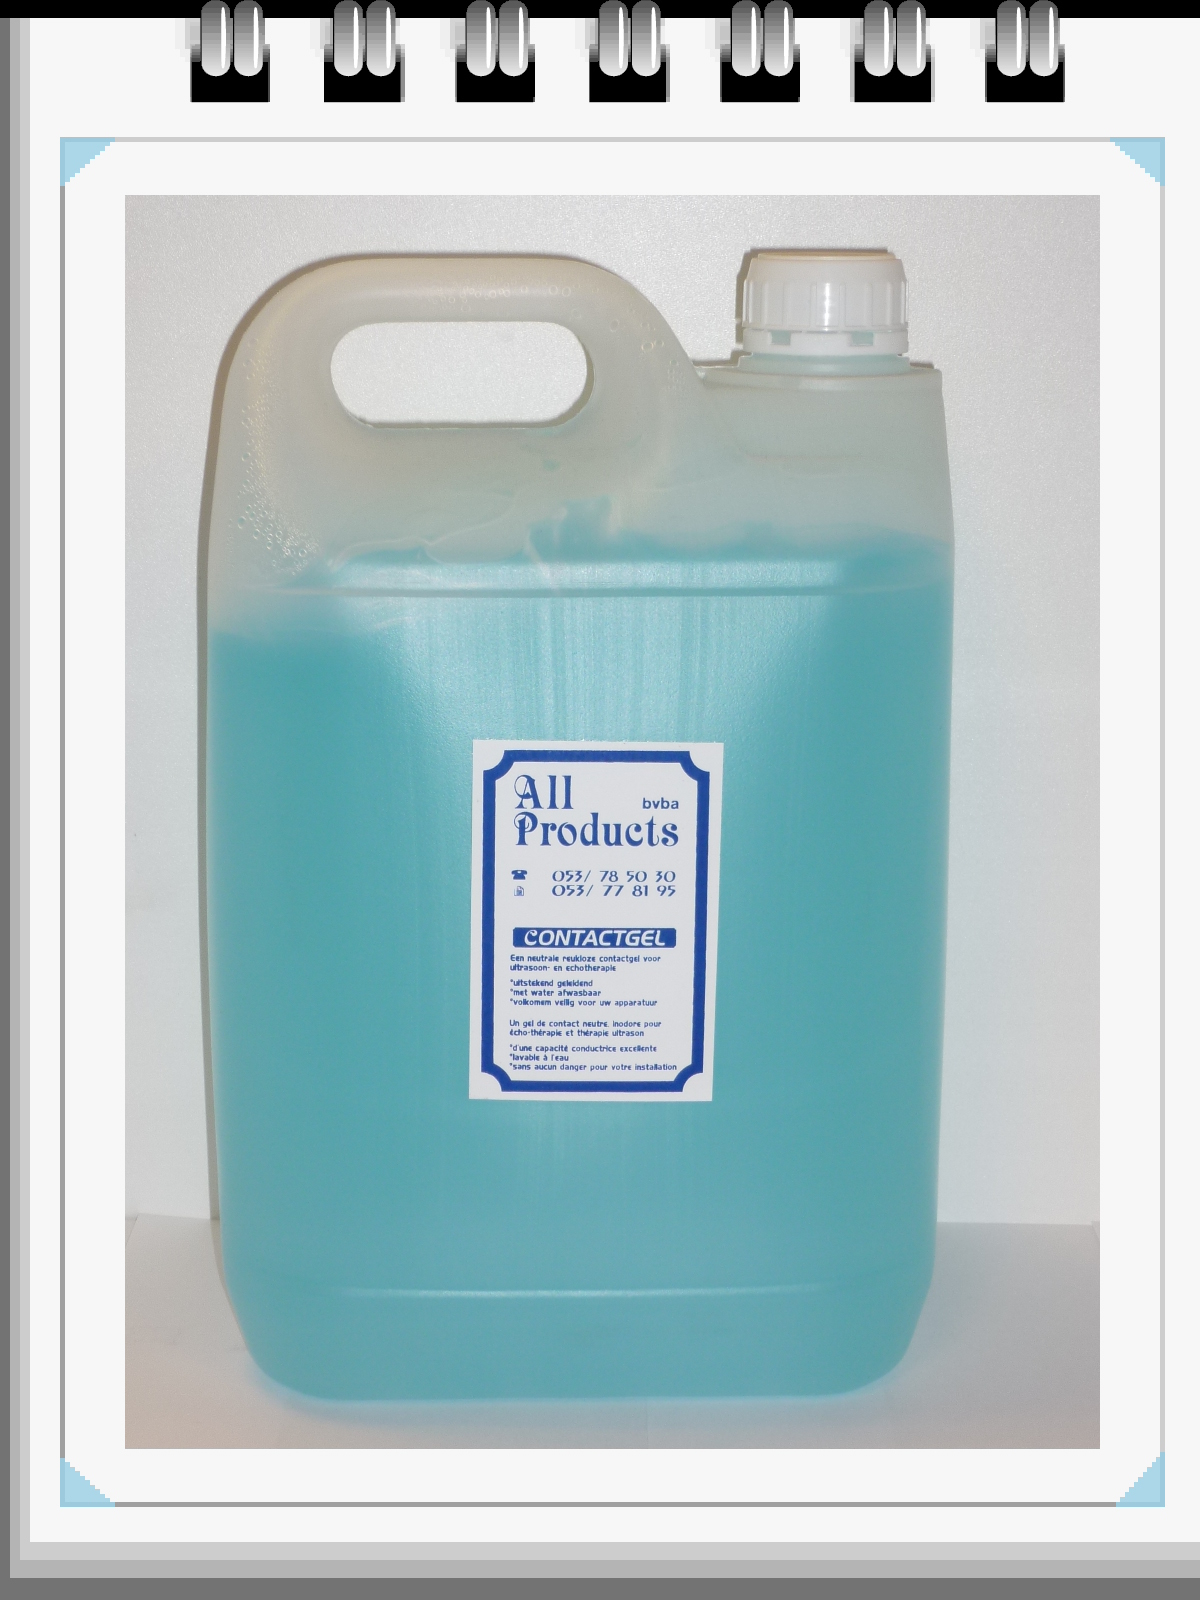 All Products - Ultrason Gel 5 Liter